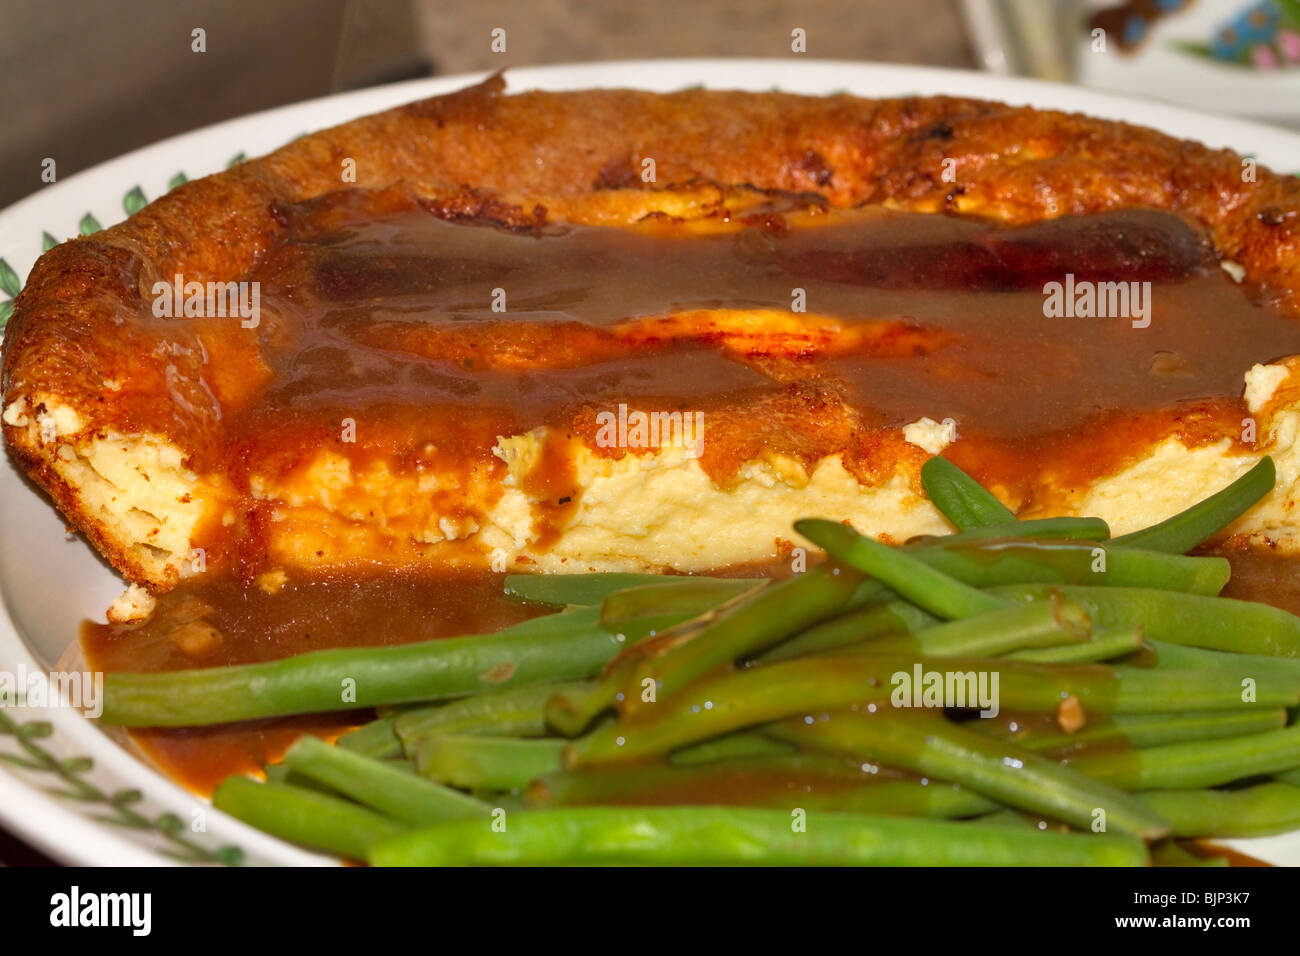 Toad in the hole, traditional British dish of sausage and yorkshire pudding with gravy and green beans Stock Photo